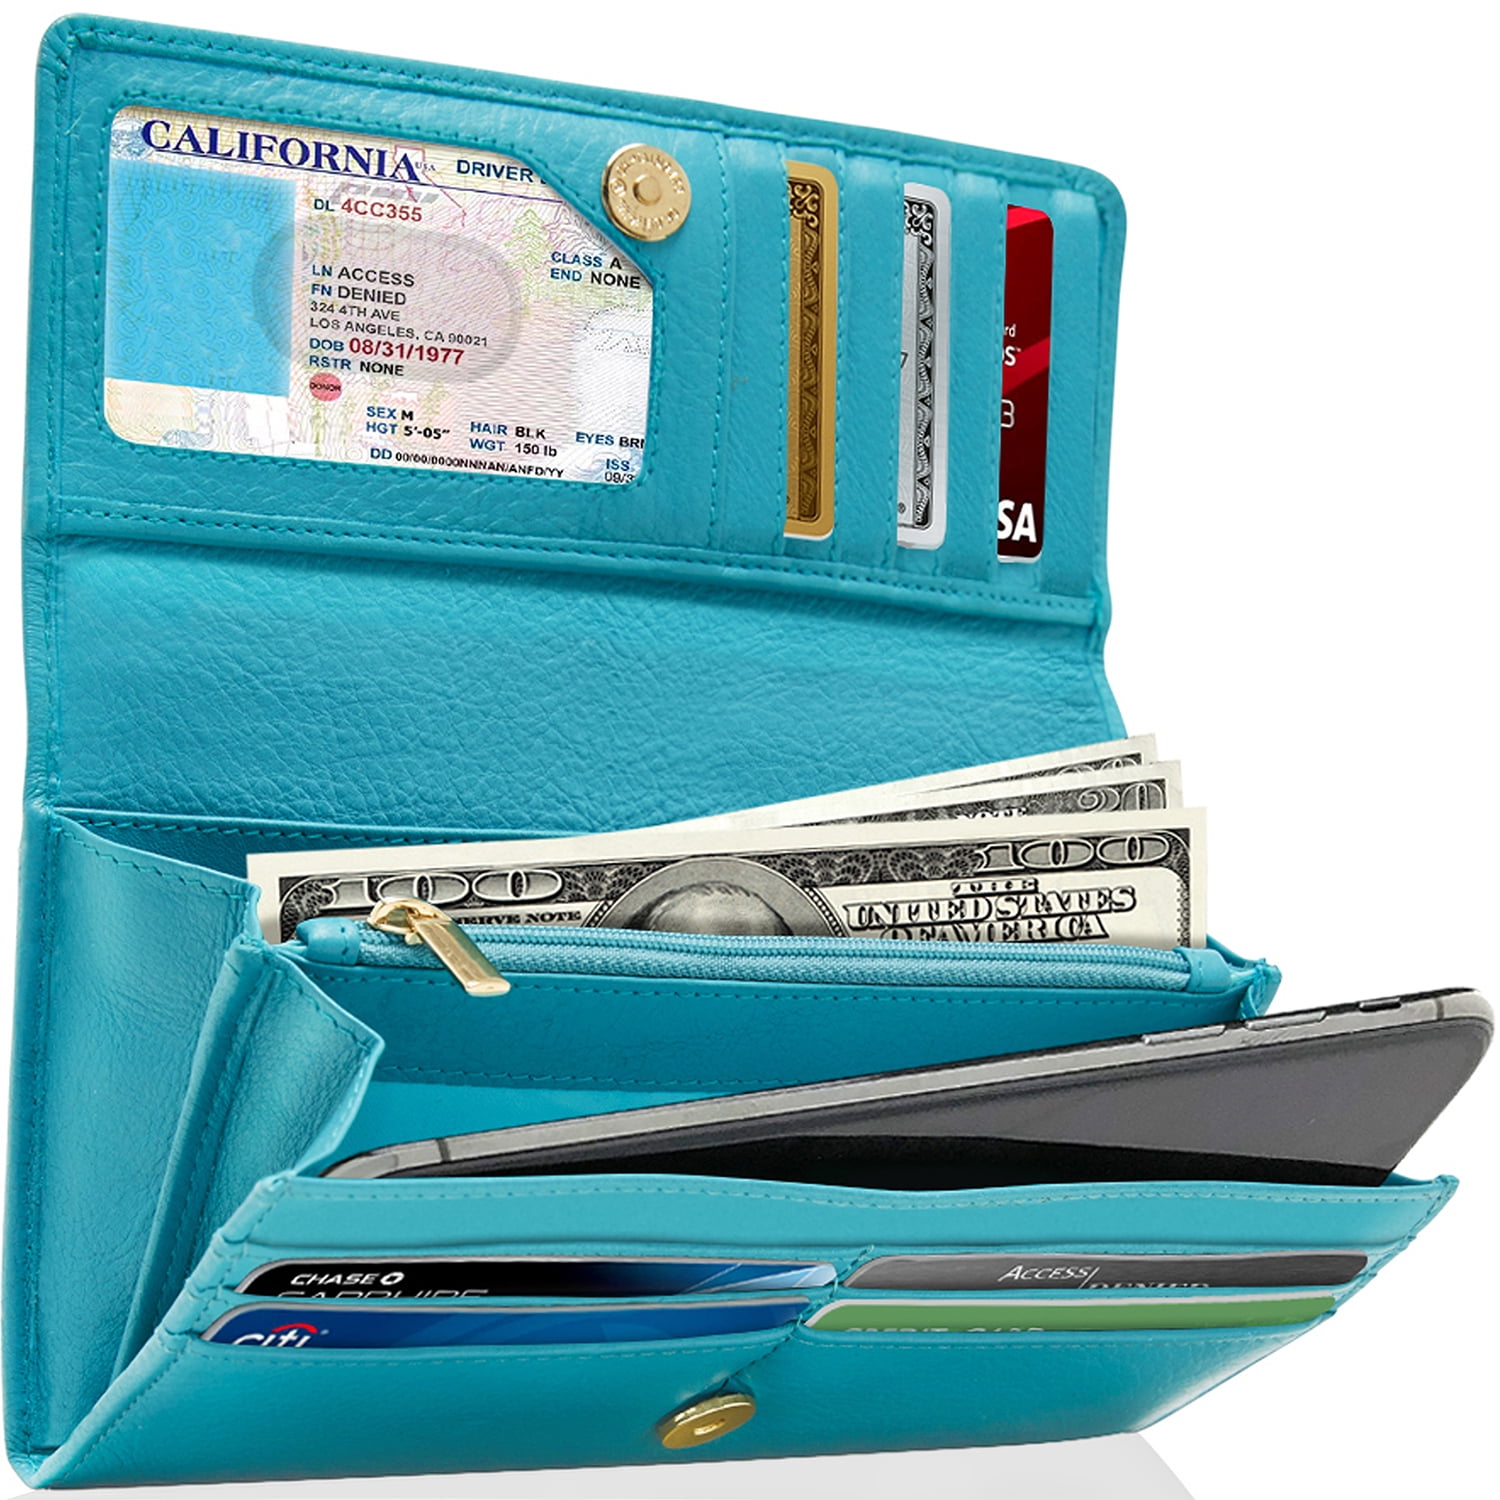 Access Denied Small Trifold Wallets for Women - Credit Card Holder with Coin Purse RFID Blocking Gifts for Her, Women's